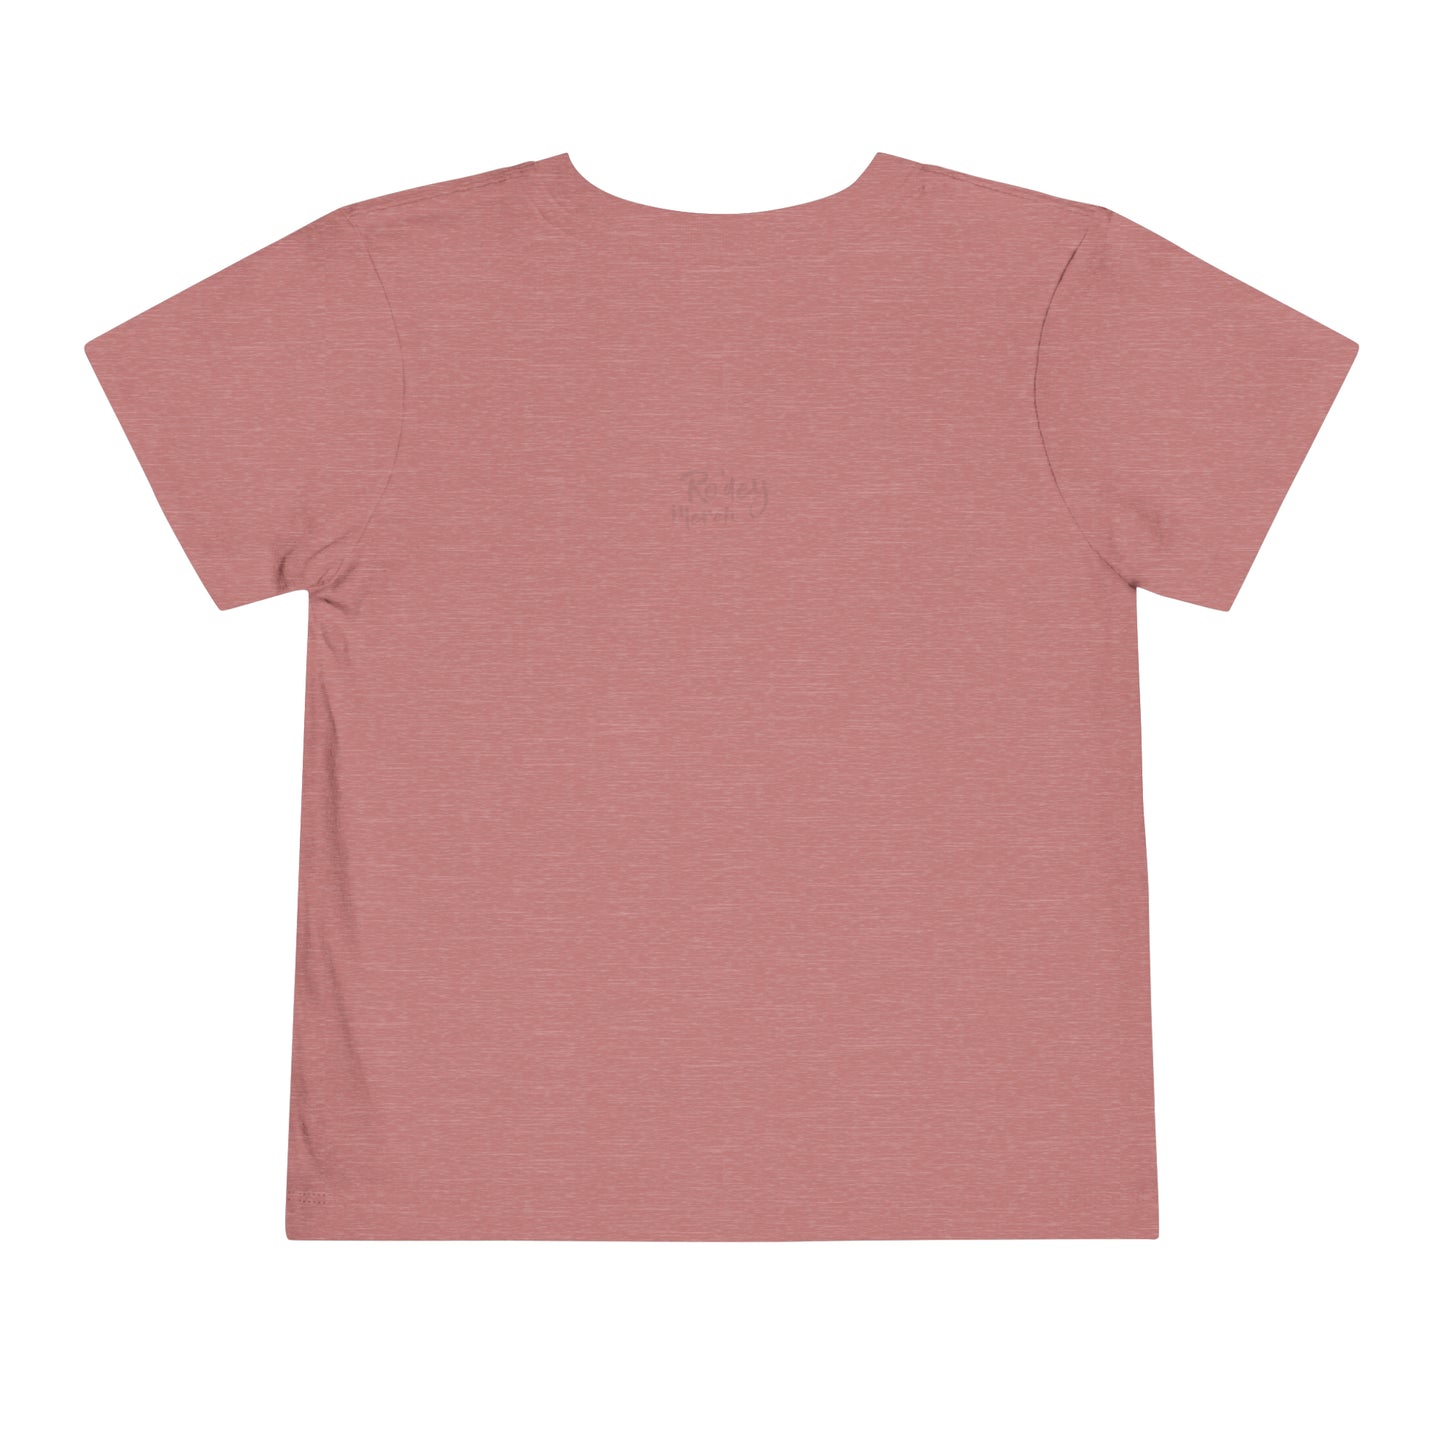 The R'odey Show (Ro'dey) Toddler SS Tee